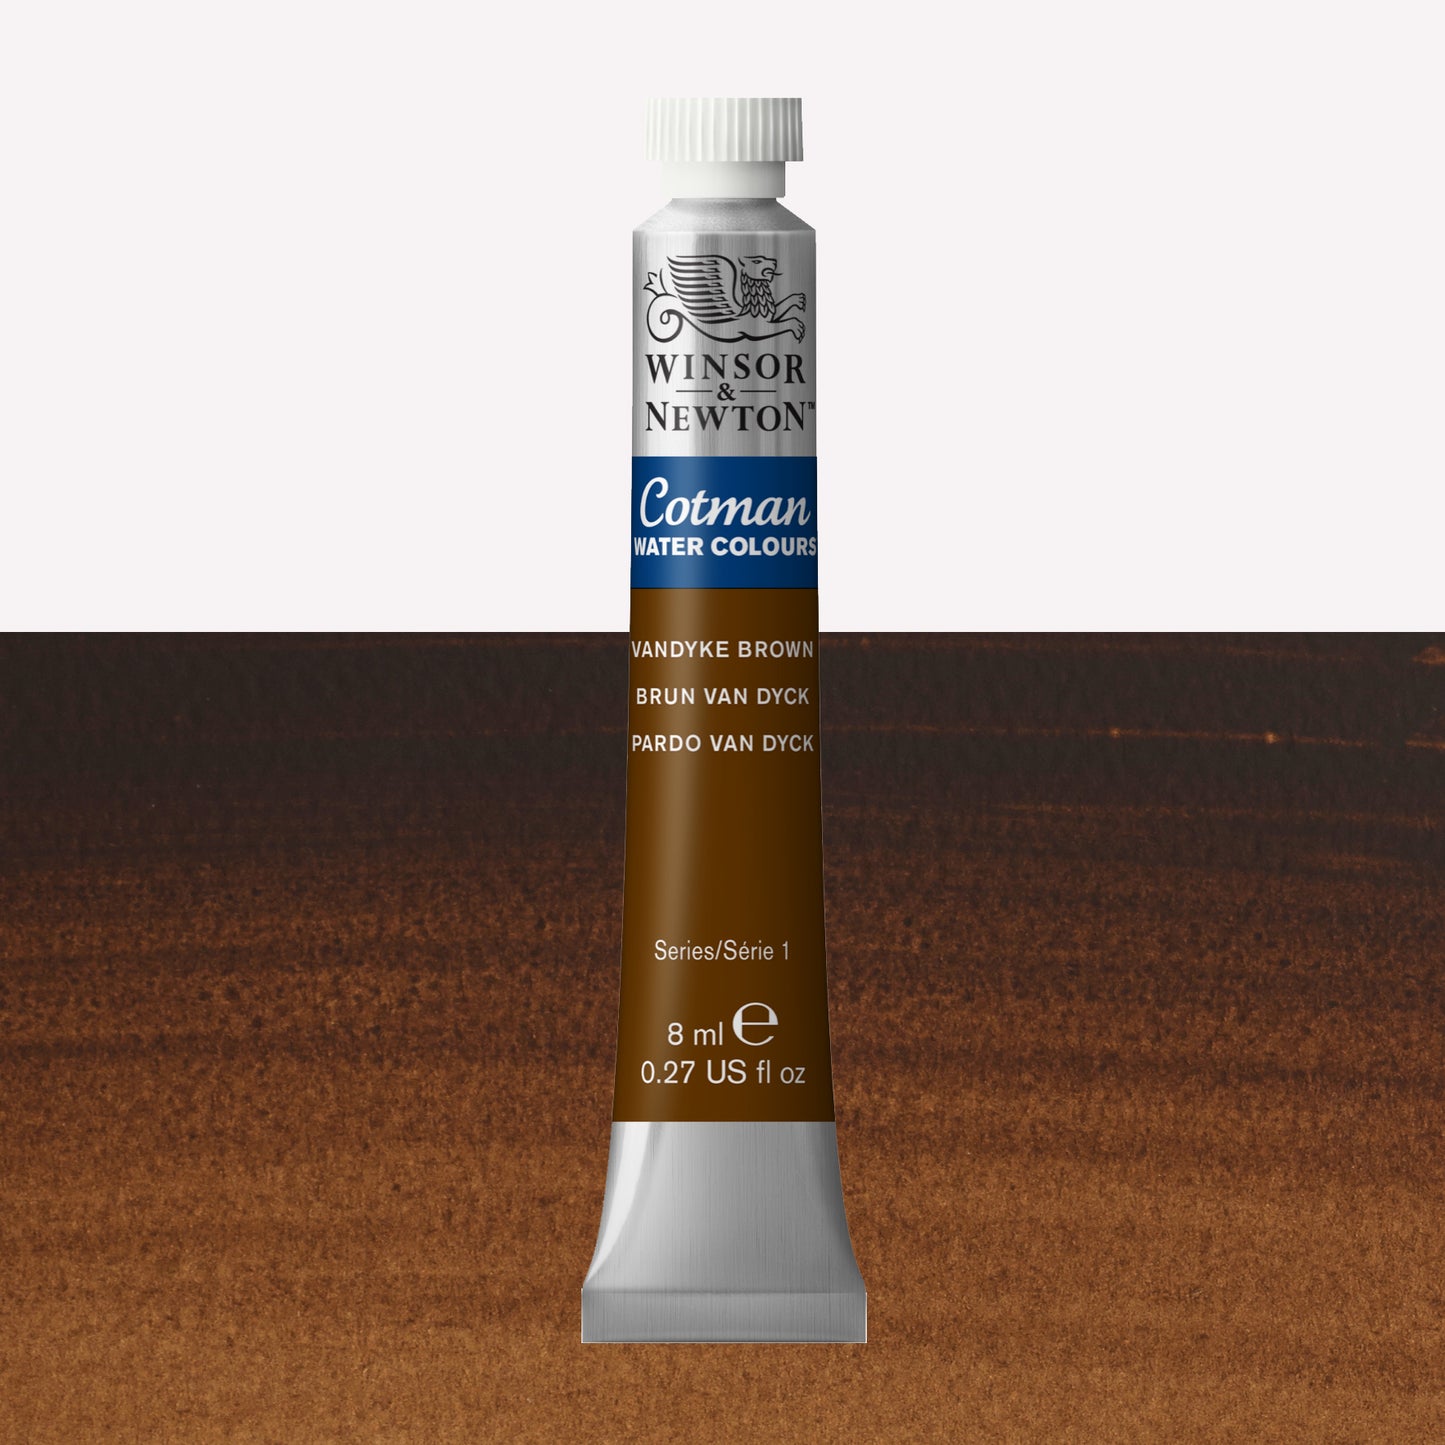 Winsor & Newton Cotman watercolour paint packaged in 8ml silver tube with a white lid in the shade Vandyke Brown over a highly pigmented colour swatch.